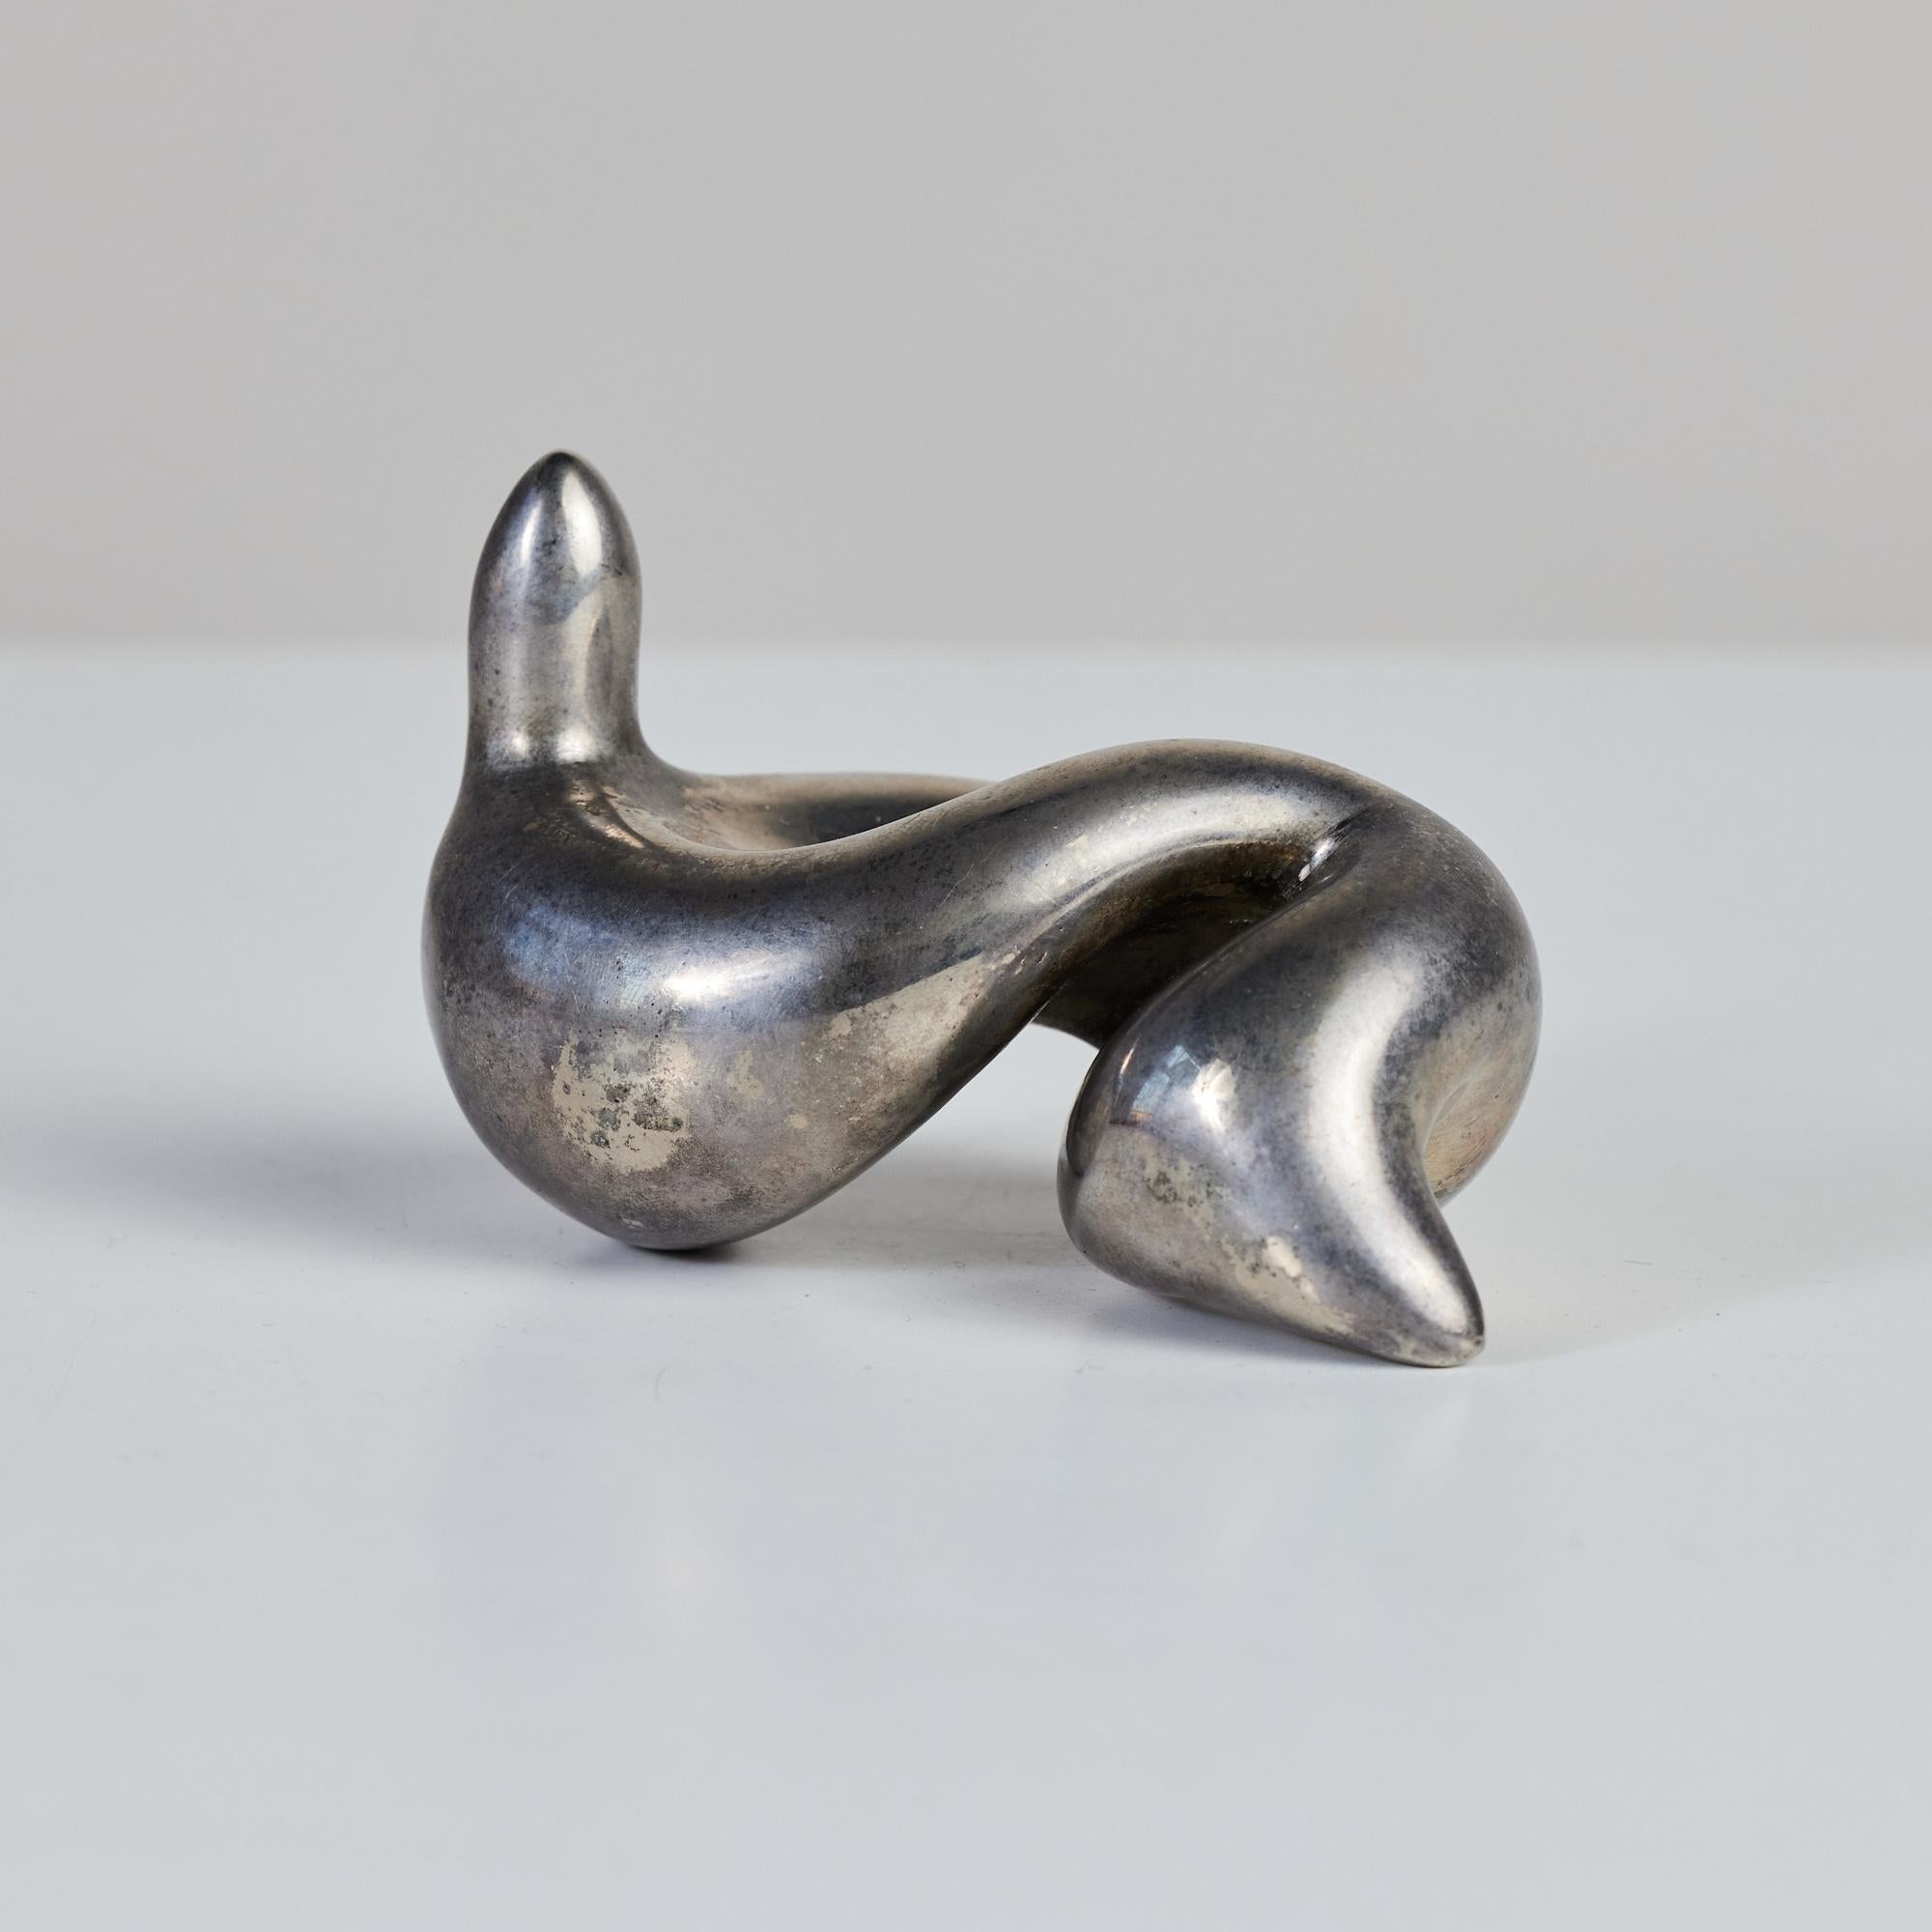 Patinated Biomorphic Silver Sculpture